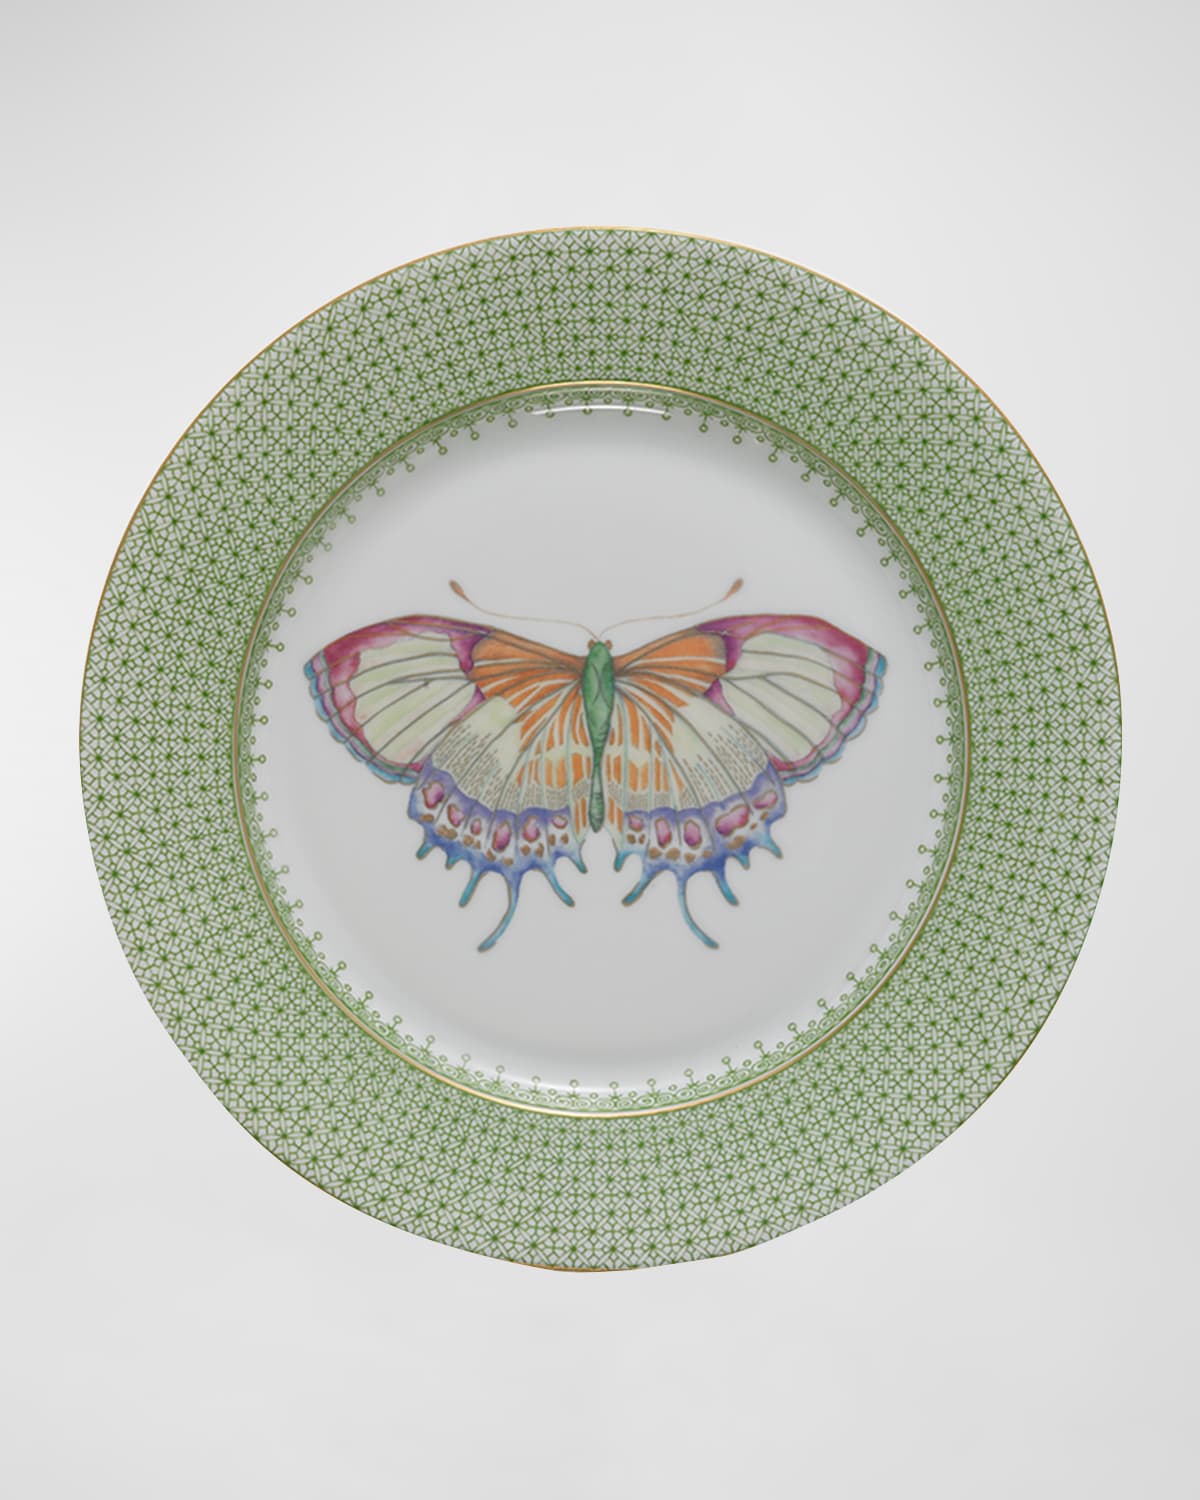 Mottahedeh Apple Lace Dessert Plate With Butterfly Center In Lt. Green